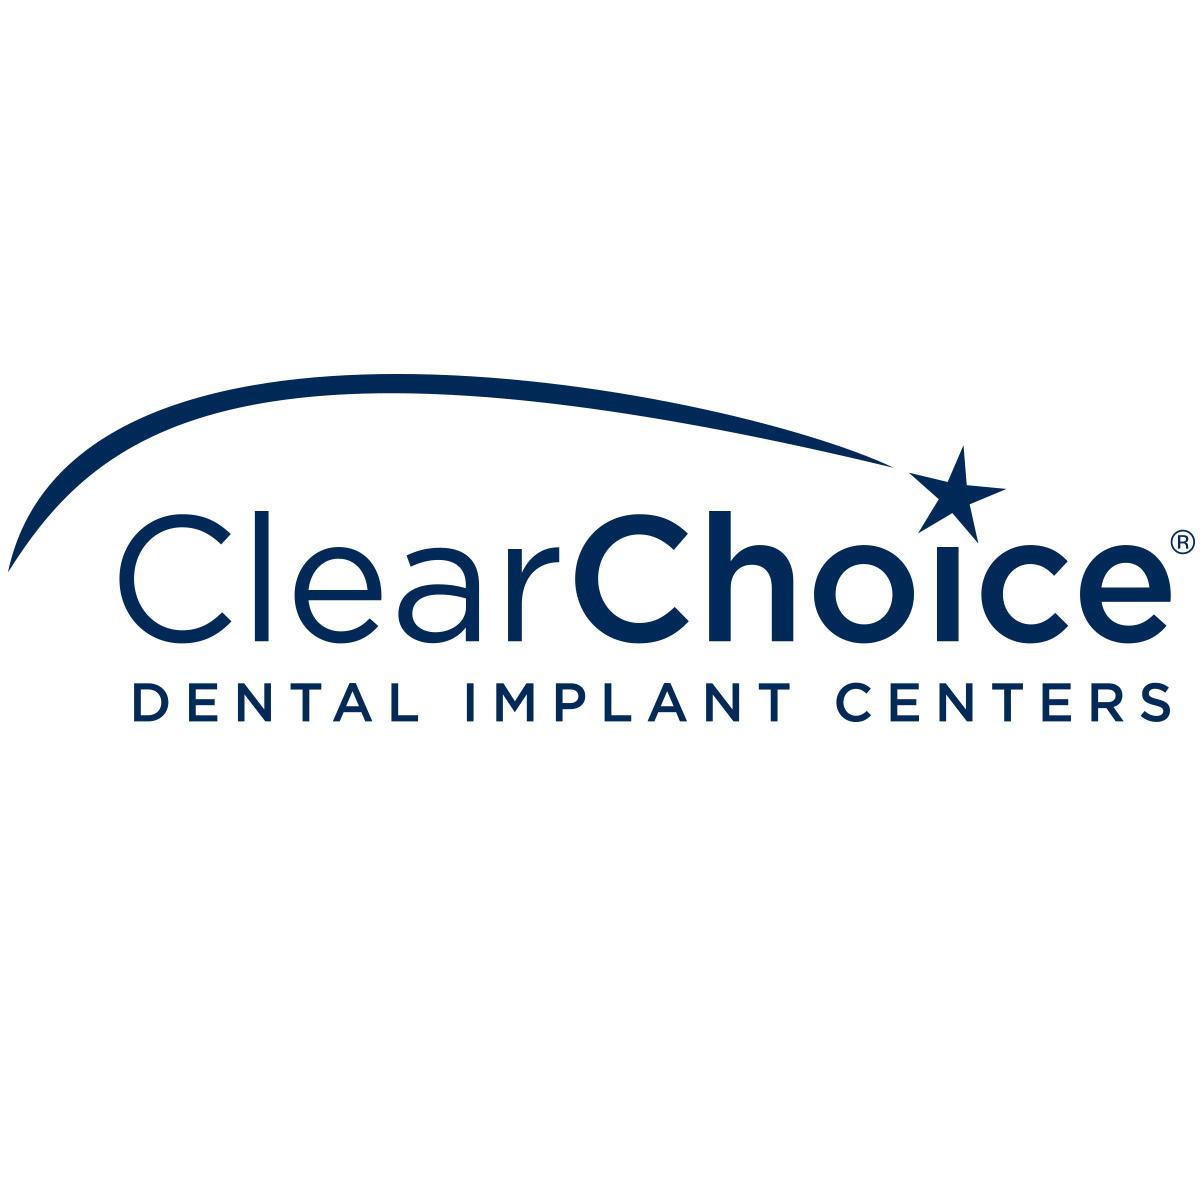 ClearChoice Dental Implant Center - Metairie, LA 70002 - (504)276-5266 | ShowMeLocal.com